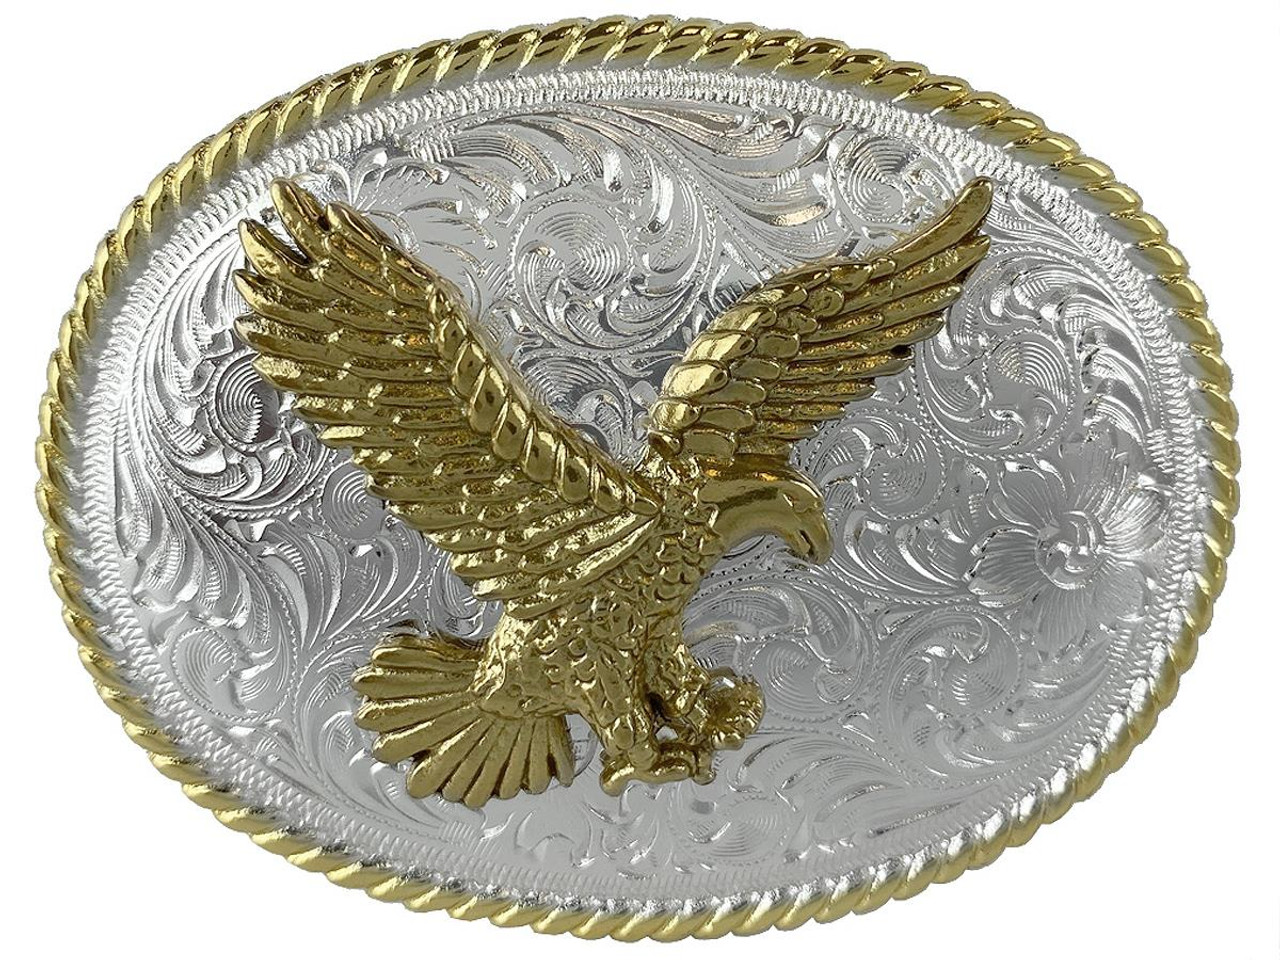 Eagle Wildlife Belt Buckle Handmade Sterling Silver, Esquivel and Fees